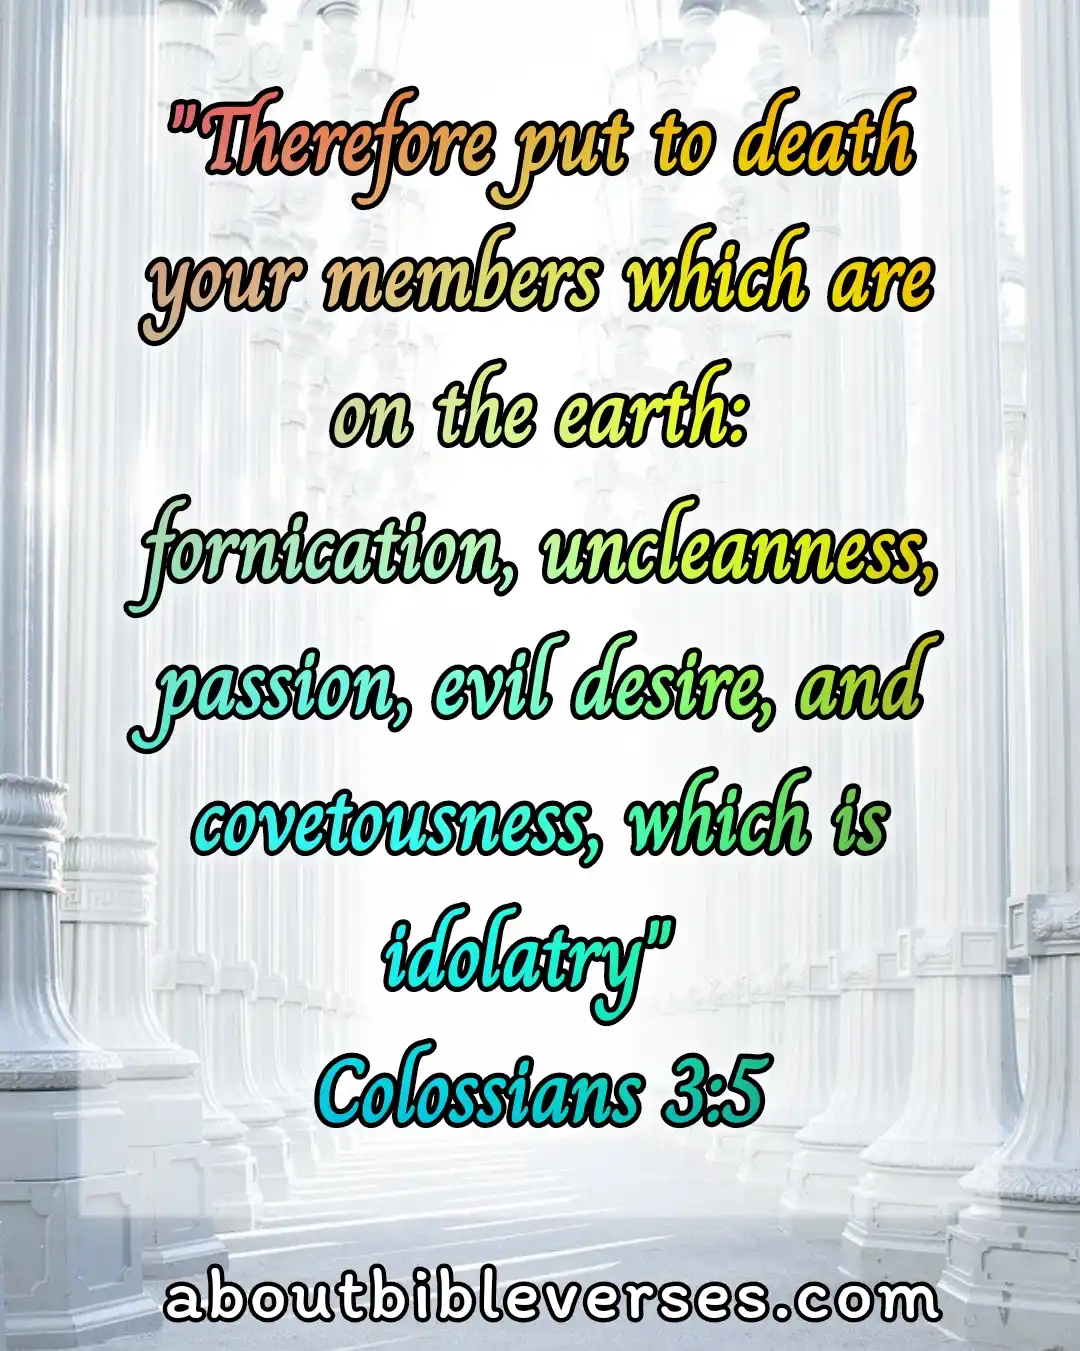 Today bible verse (Colossians 3:5)